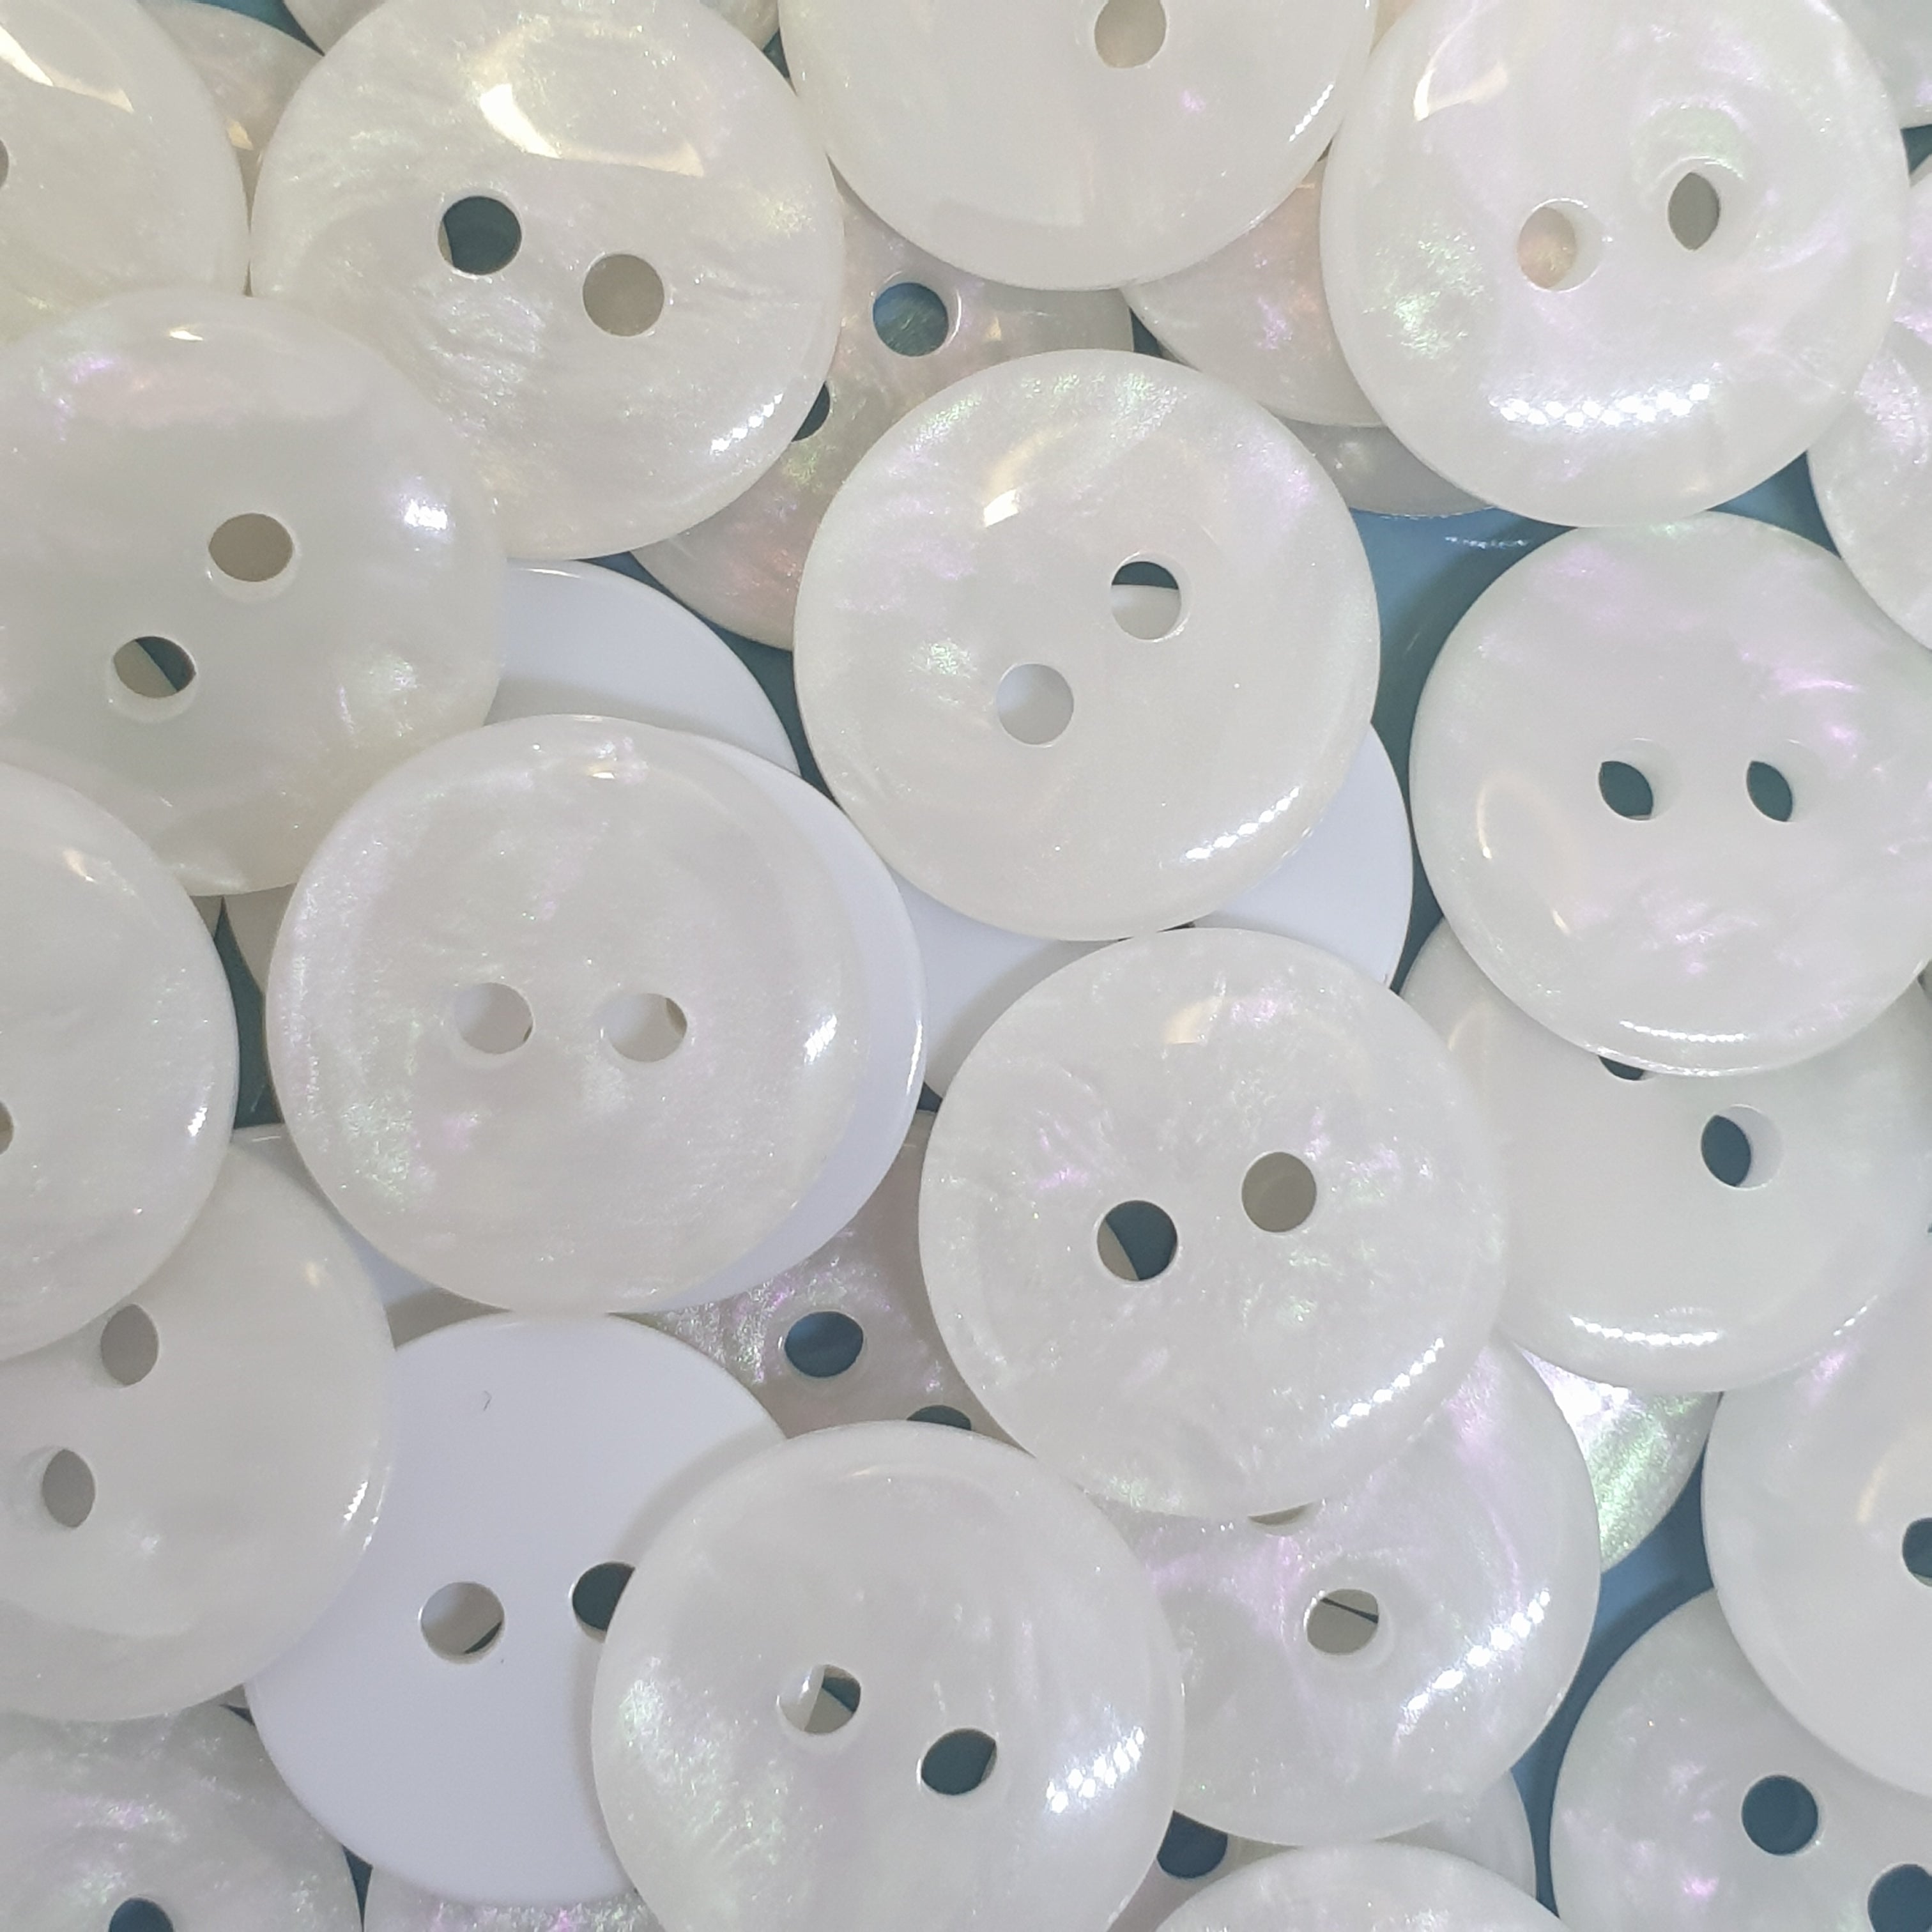 MajorCrafts 40pcs 18mm Cream White Pearlescent Galaxy Effect 2 Holes Round Resin Sewing Buttons